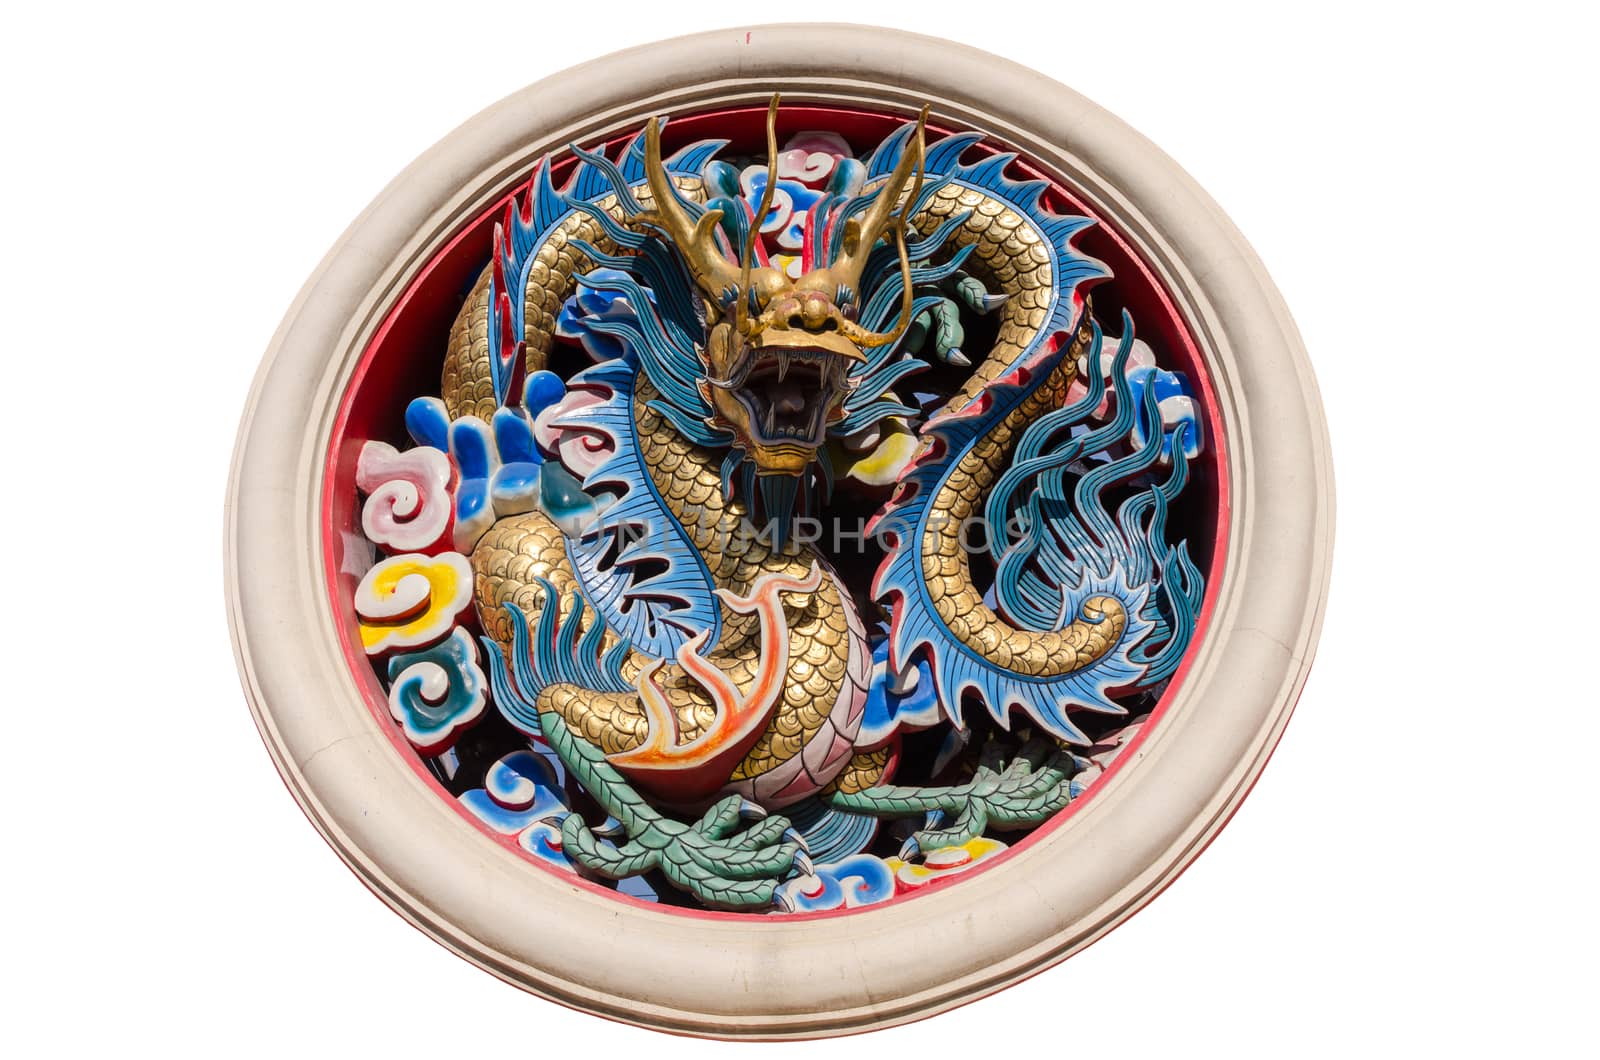 Dragon statue in Chinese temple on white background.